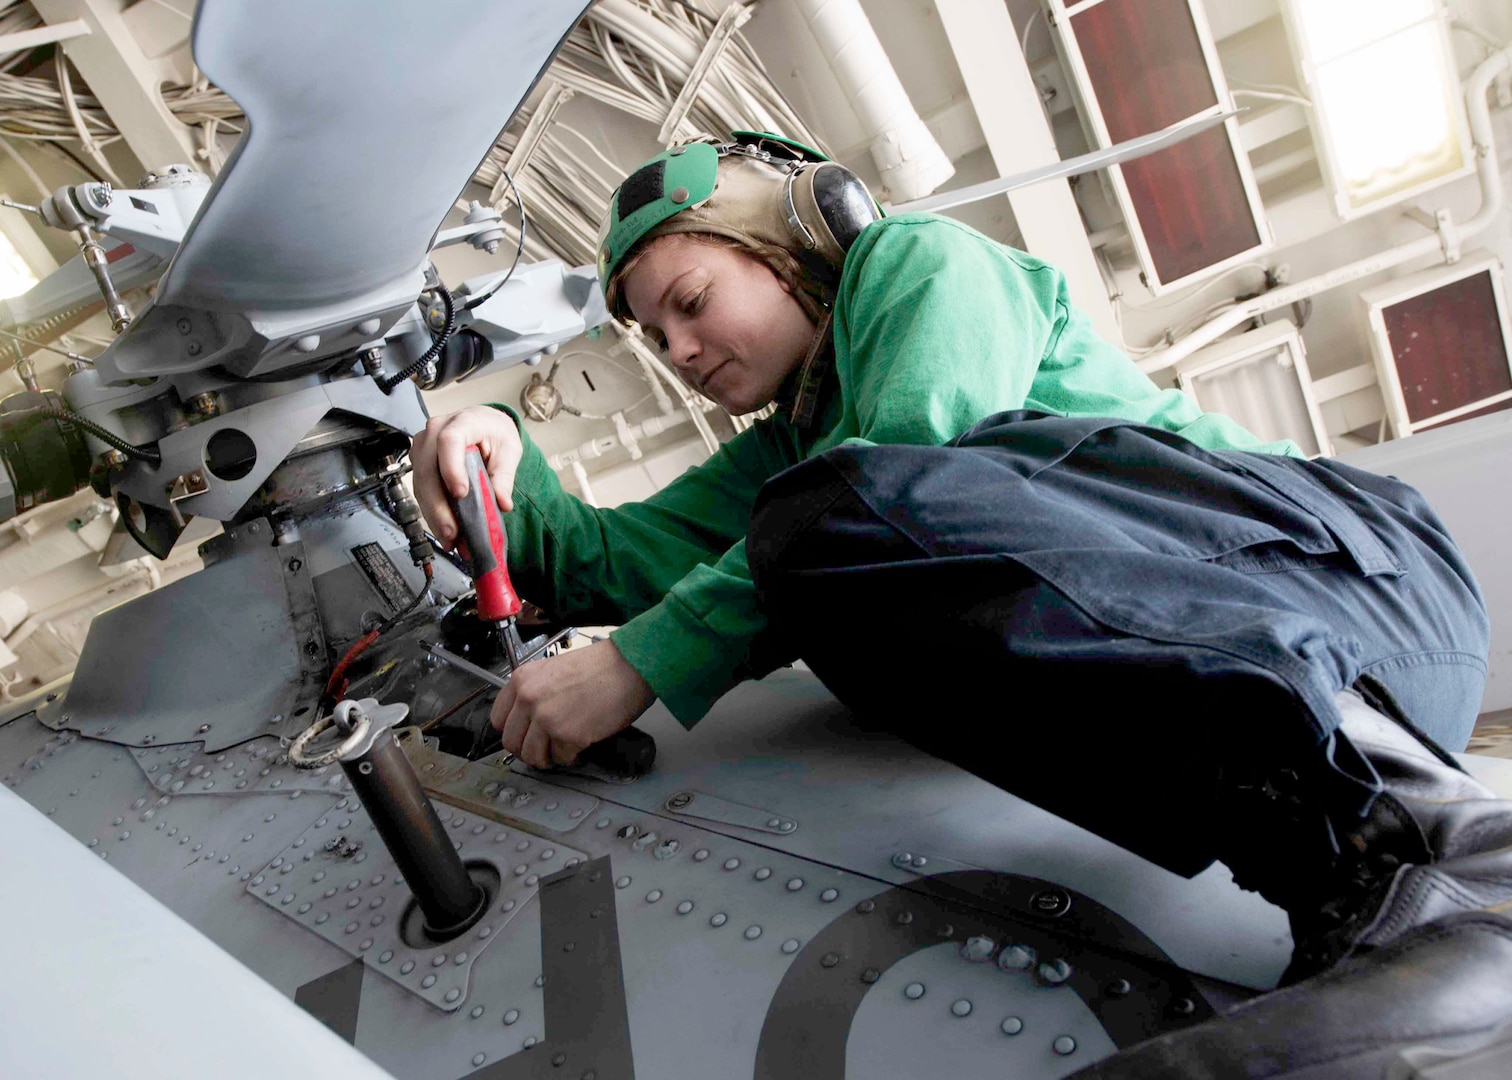 Image of a sailor leaning under stationary helicopter rotor while working on repairs.